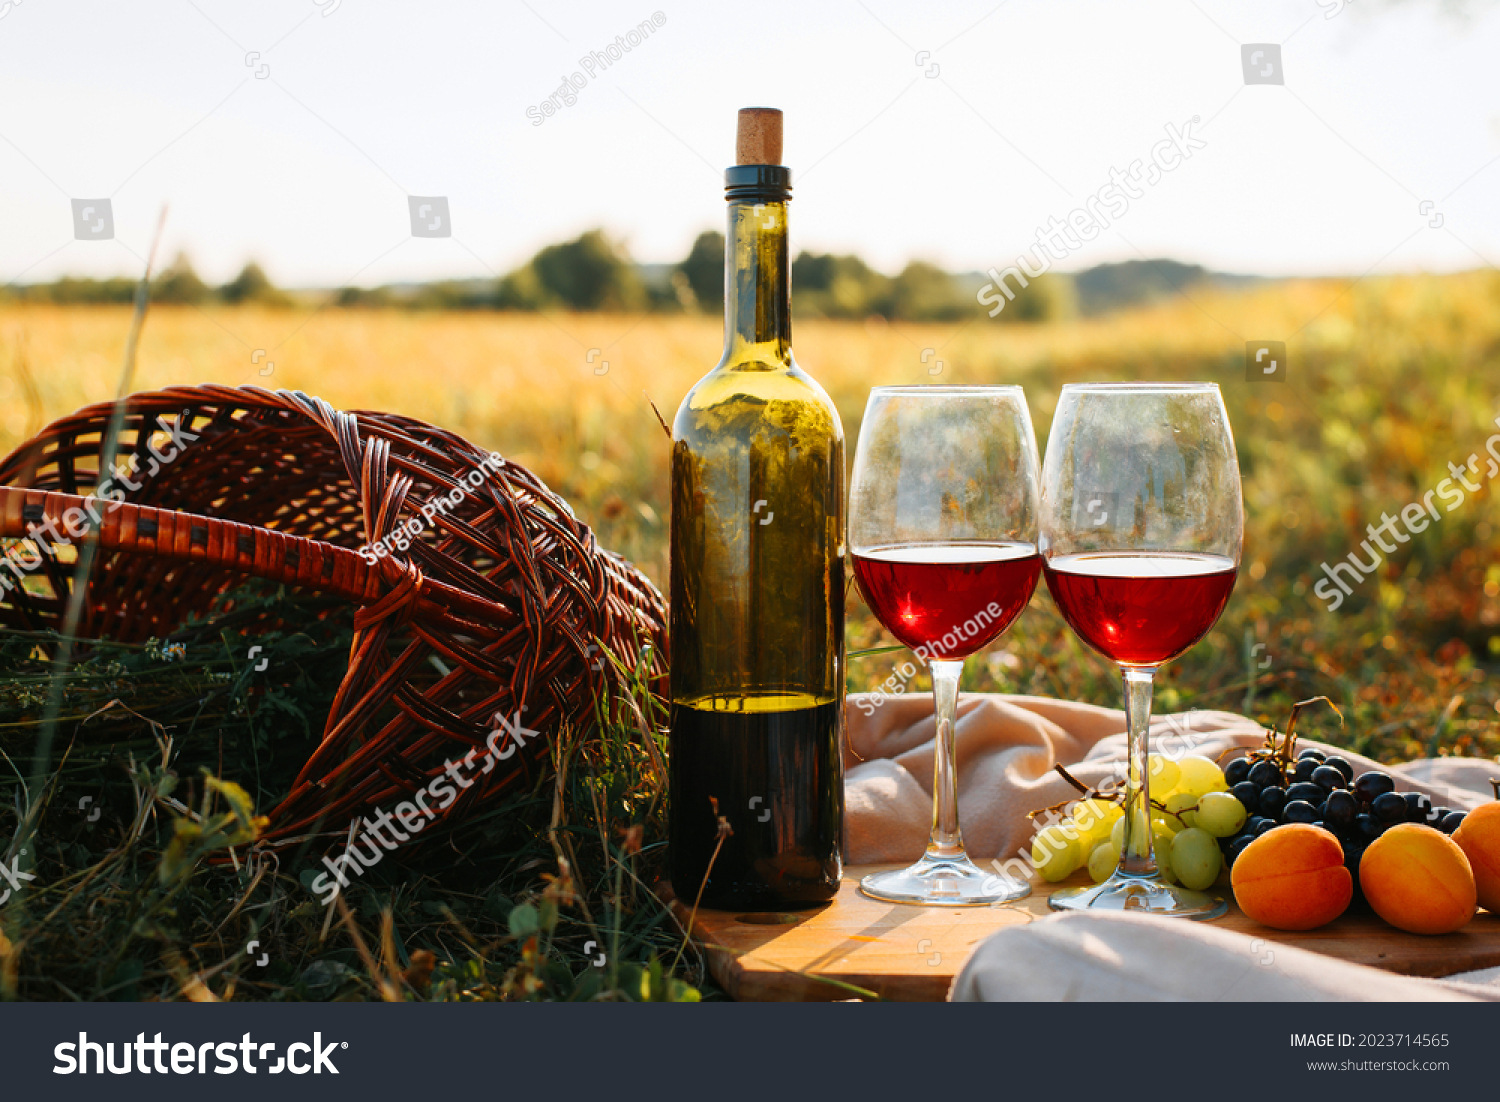 Picnic, romantic evening in nature concept. Bottle of red wine, glasses with drink, grapes, peaches on wooden board, wicker picnic basket on sunset background #2023714565